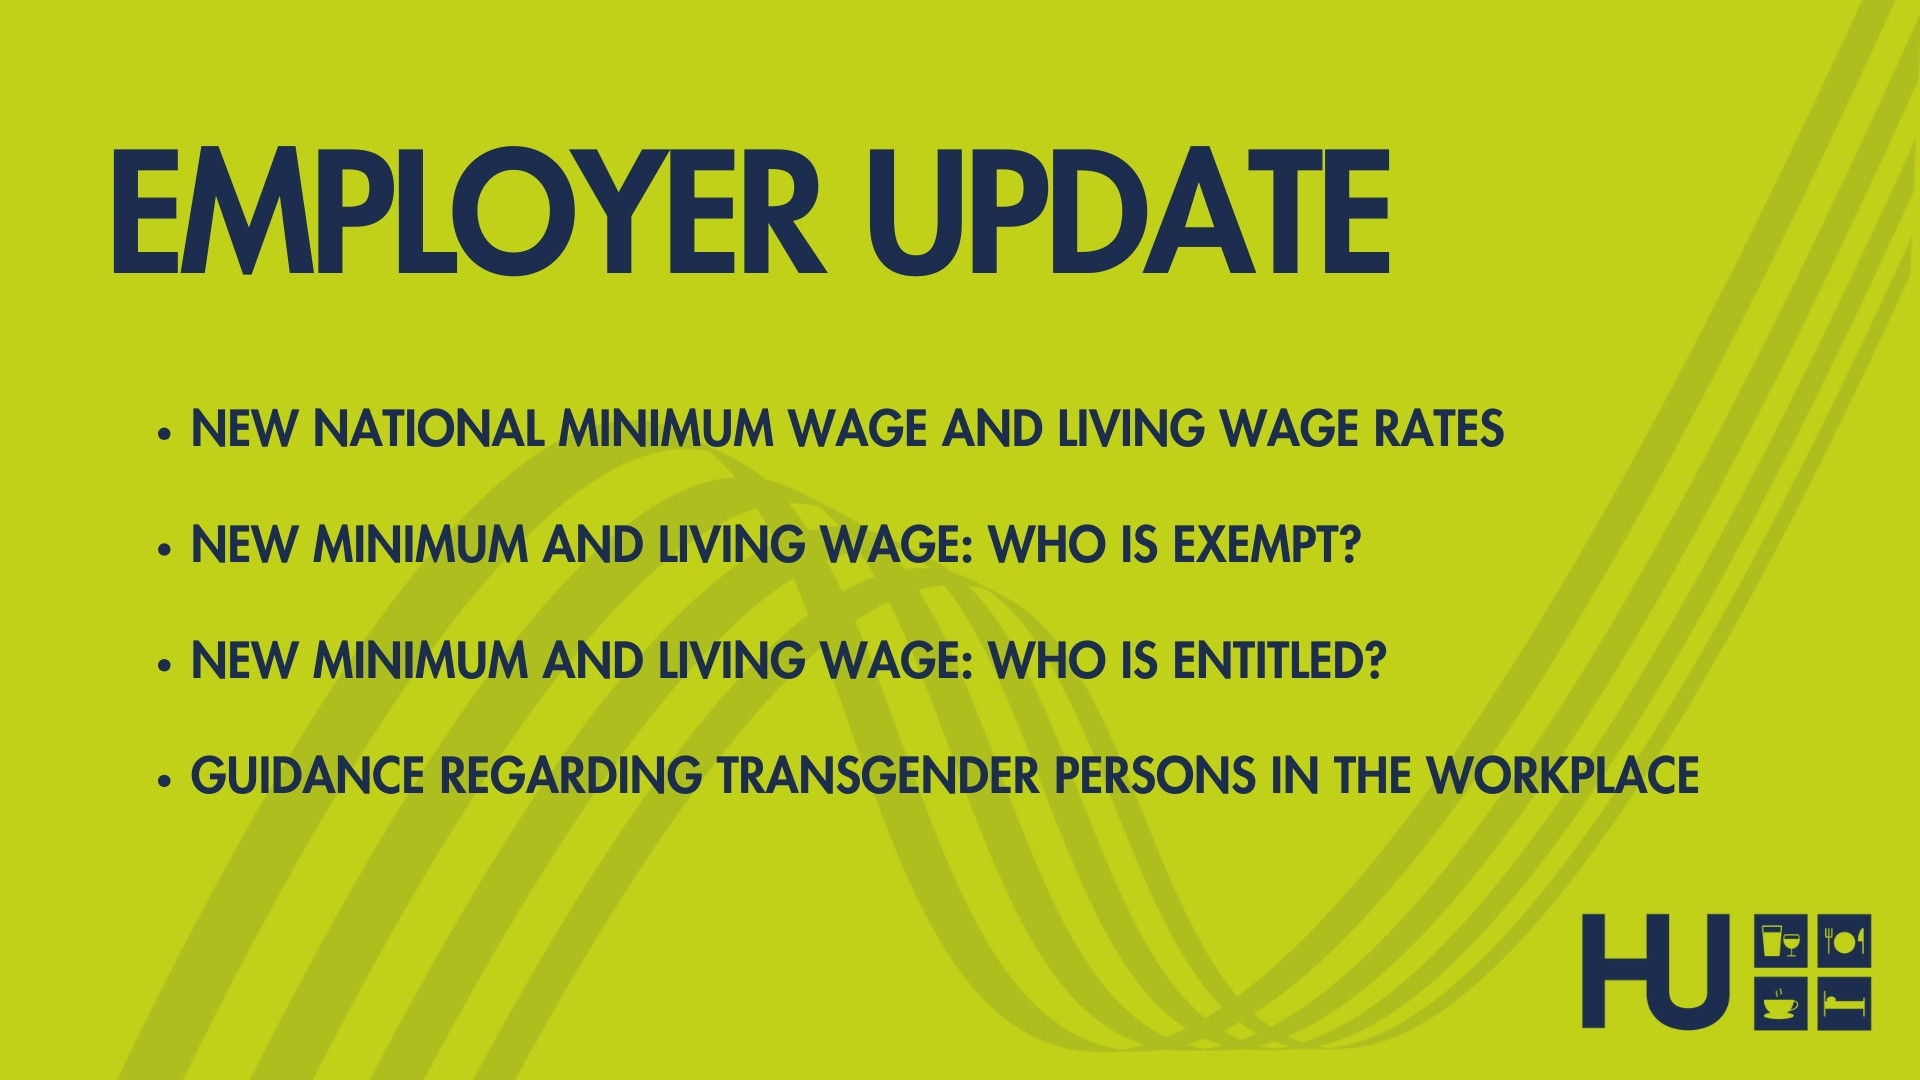 EMPLOYER UPDATE - MINIMUM AND LIVING WAGE AND TRANSGENDER EMPLOYEES